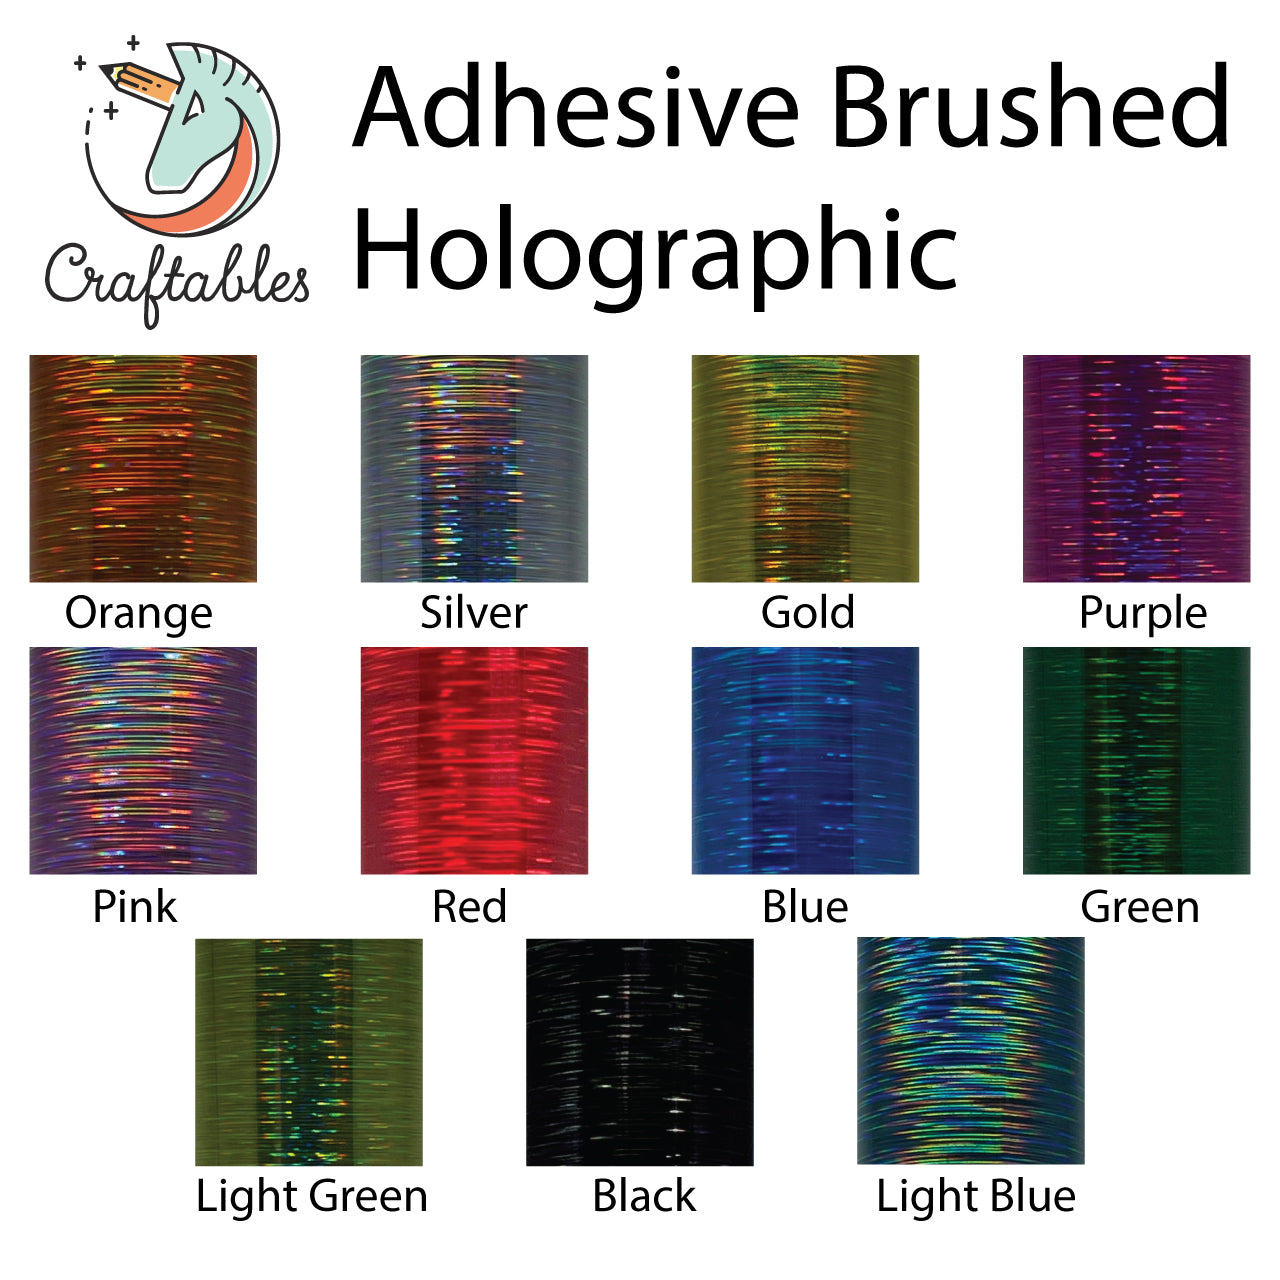 Silver Brushed Holographic Adhesive Vinyl Rolls By Craftables